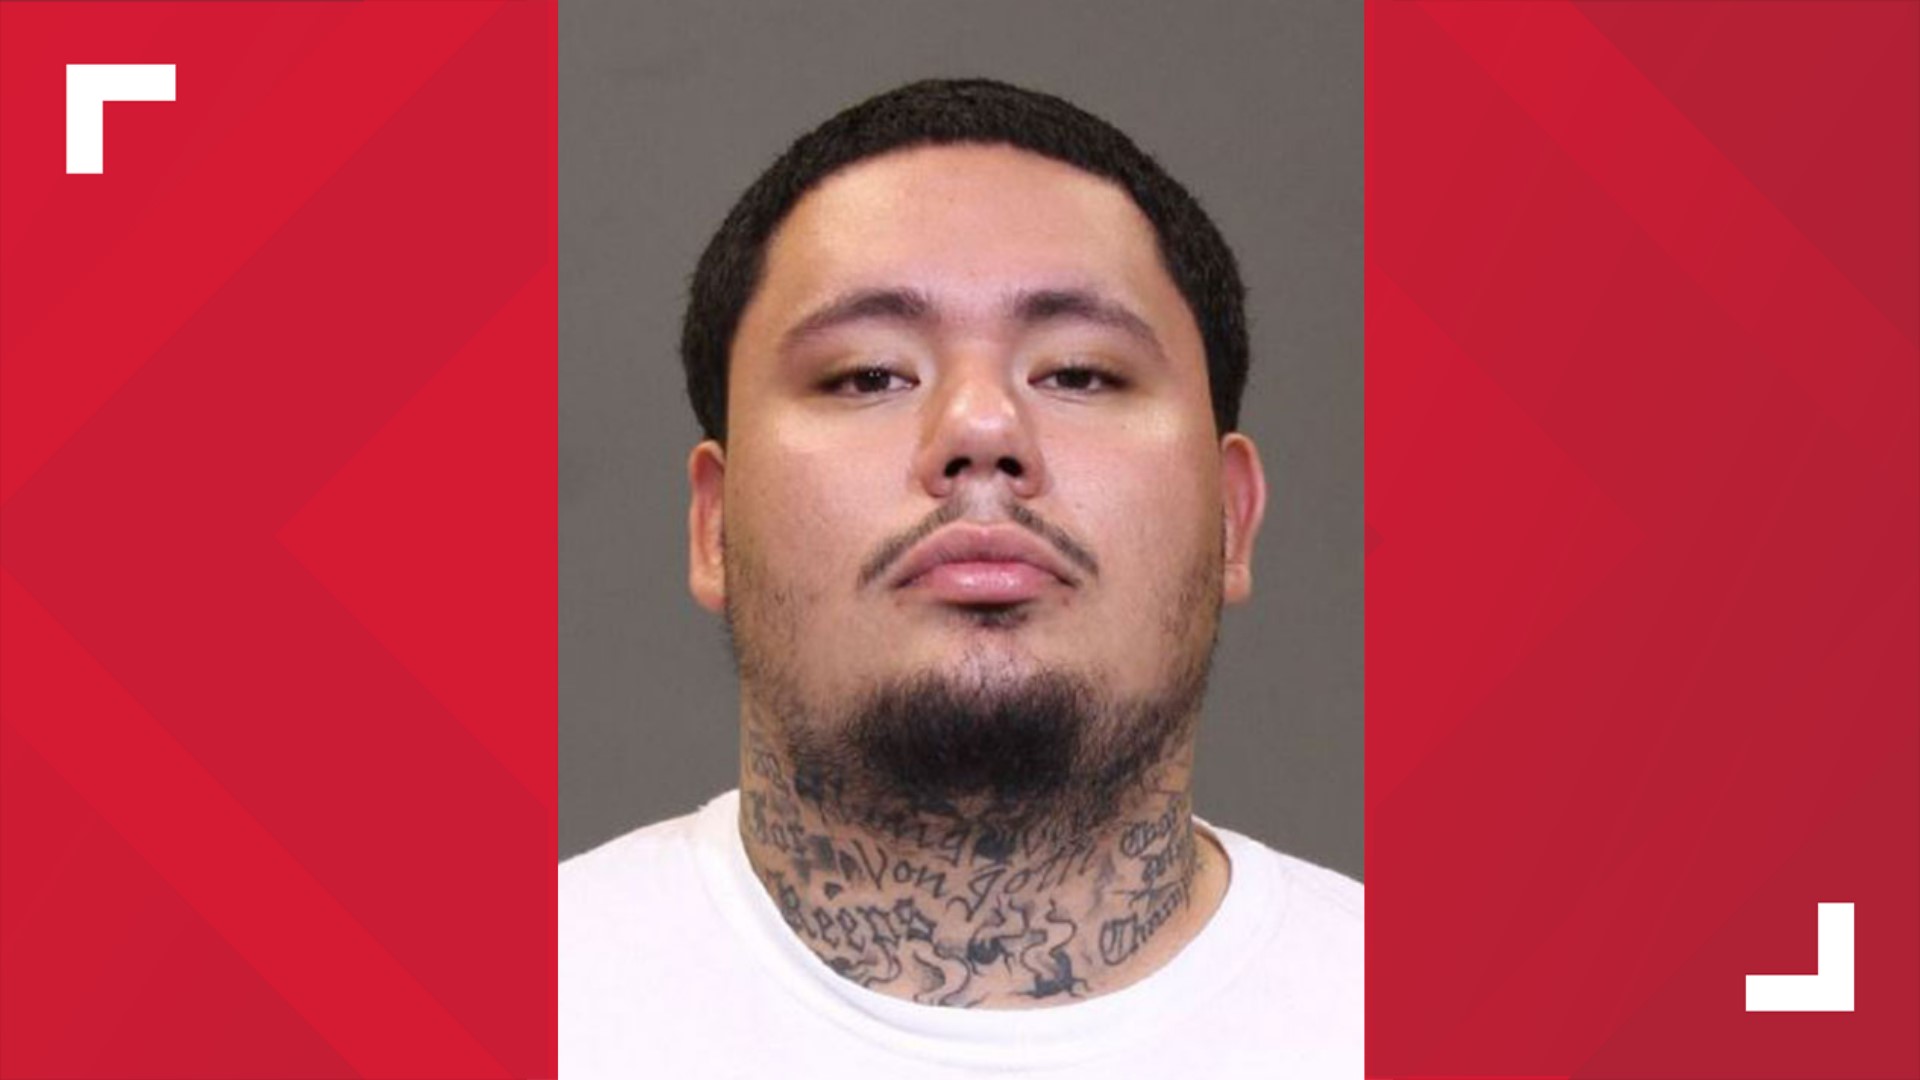 Police have charged 25-year-old Armando Flores with murder in the shooting of 51-year-old Rudy Tirado-Gonzalez.